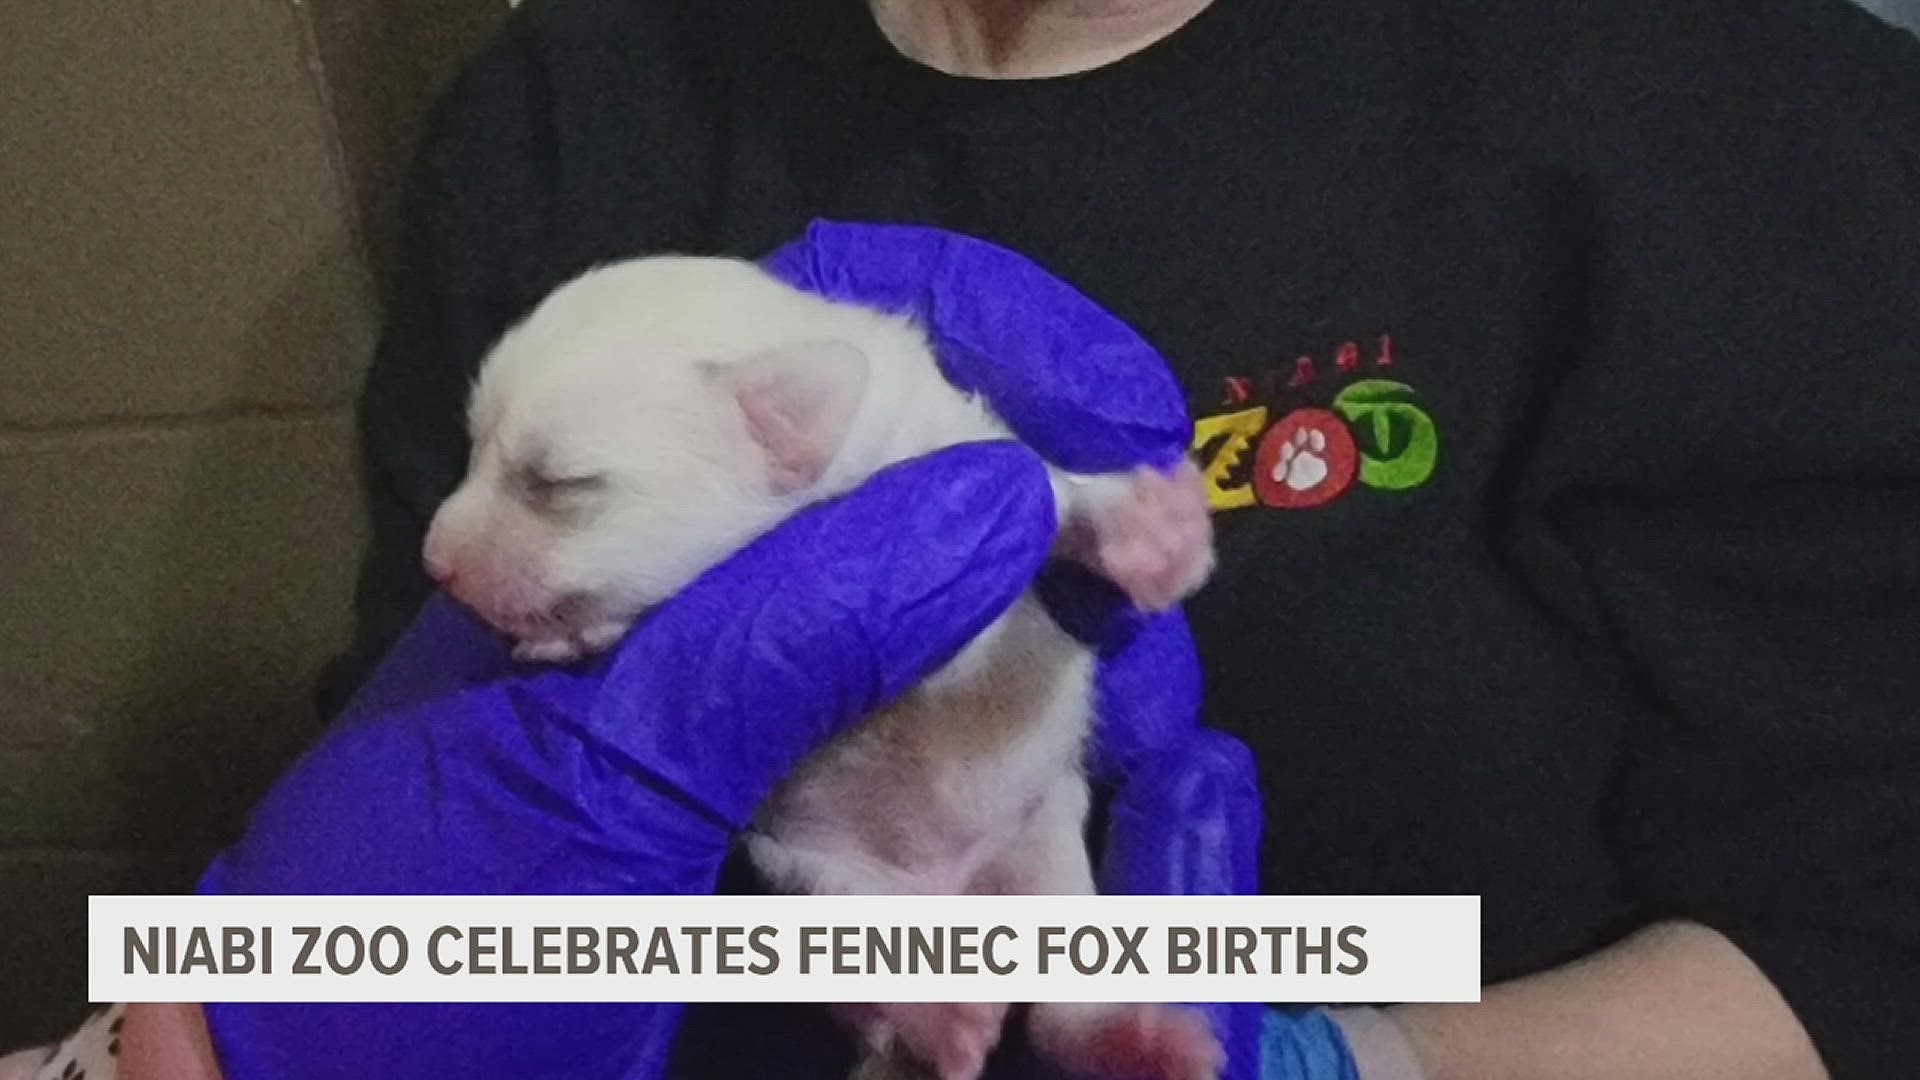 Niabi Zoo is welcoming two baby Fennec Foxes into the world after they were born to parents Carlos and Lidi on April 12.